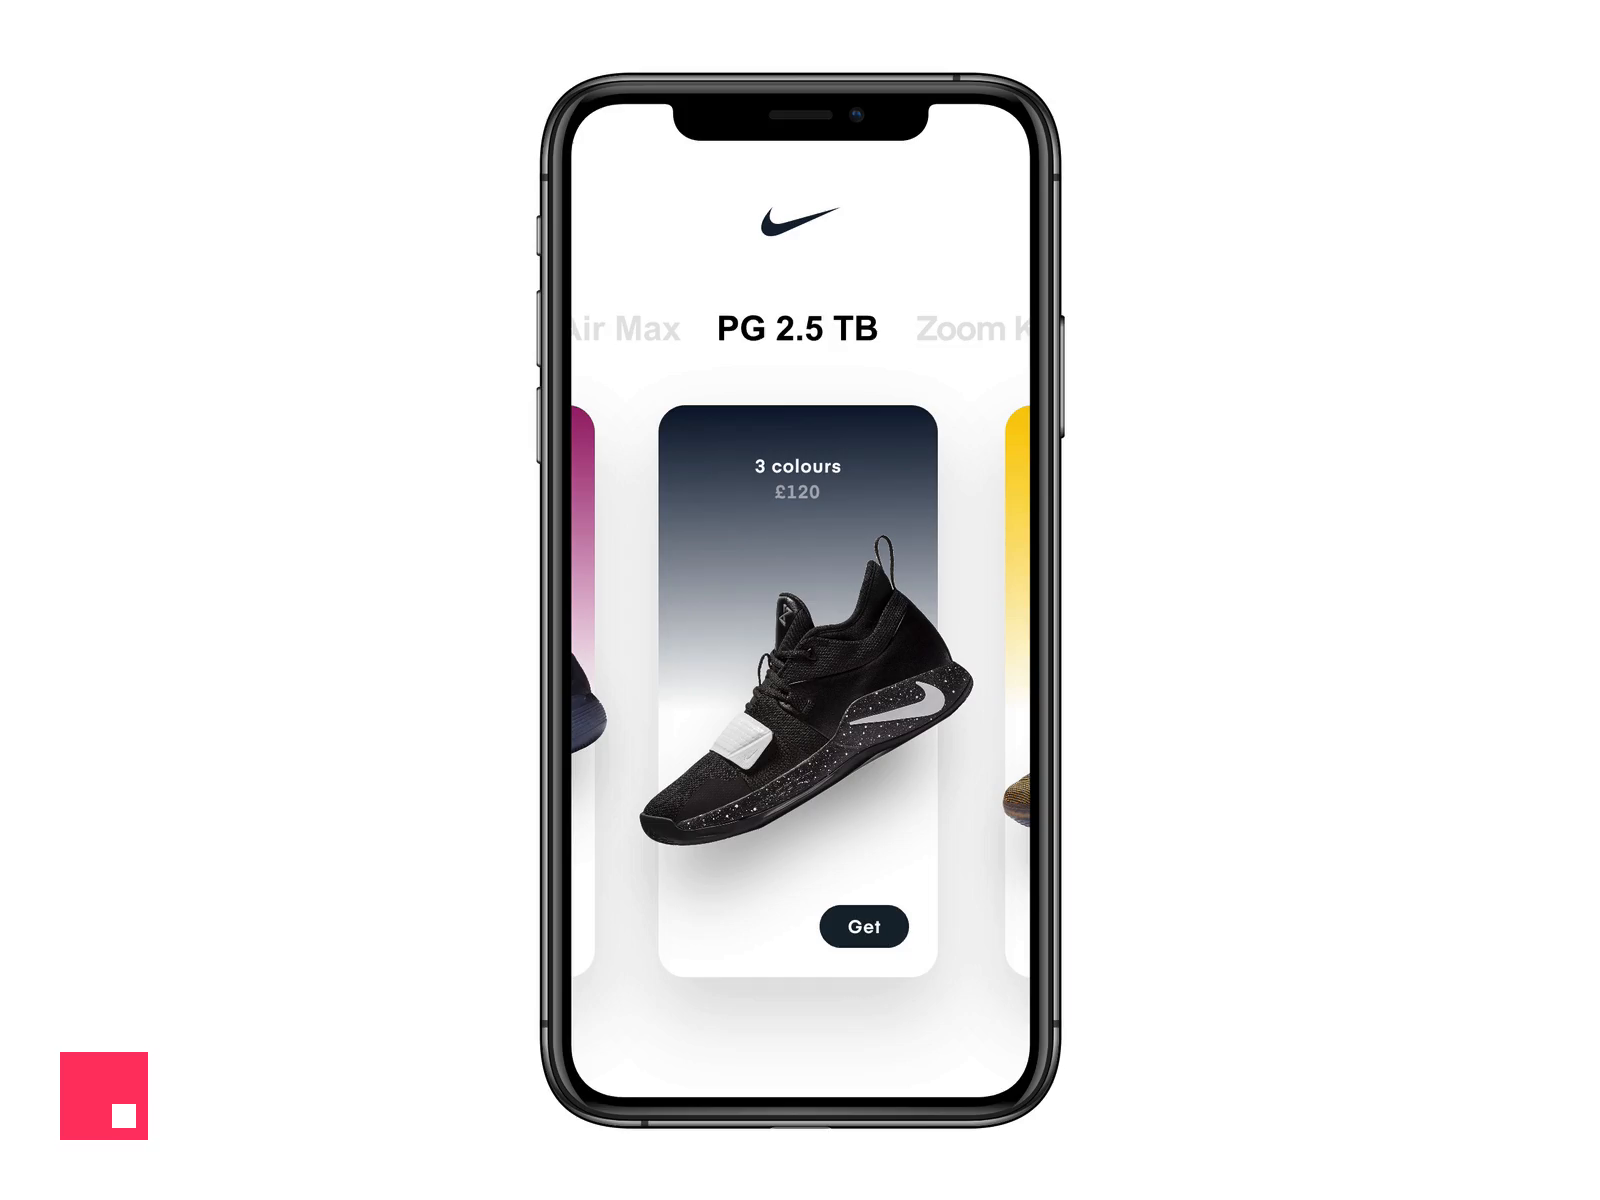 Nike app — natural motion effect by Charles Patterson on Dribbble